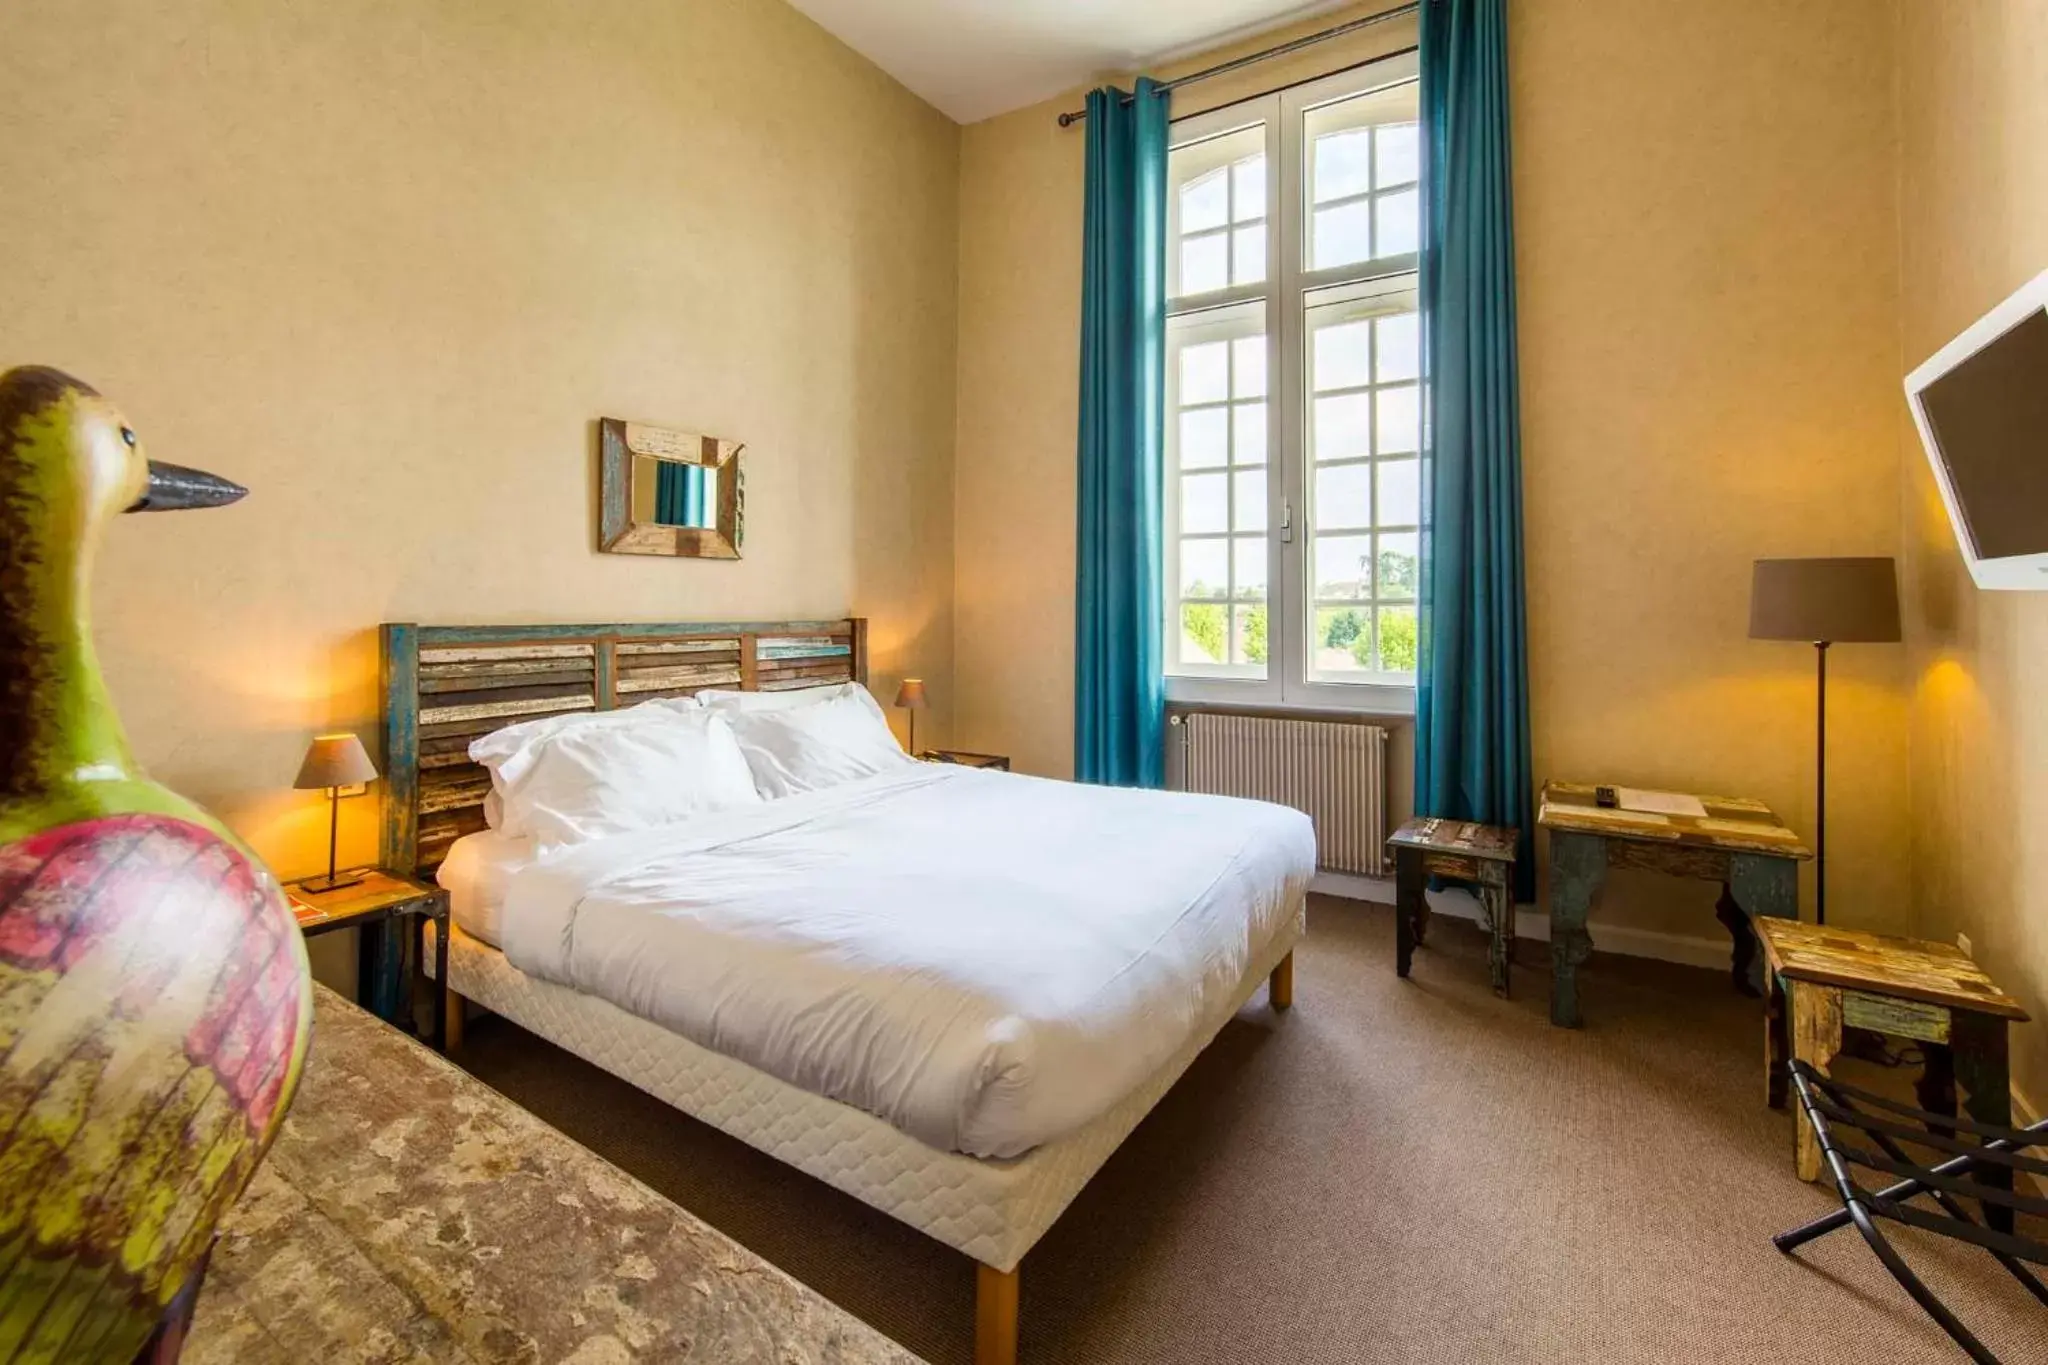 Bedroom, Room Photo in Les Trois Lys